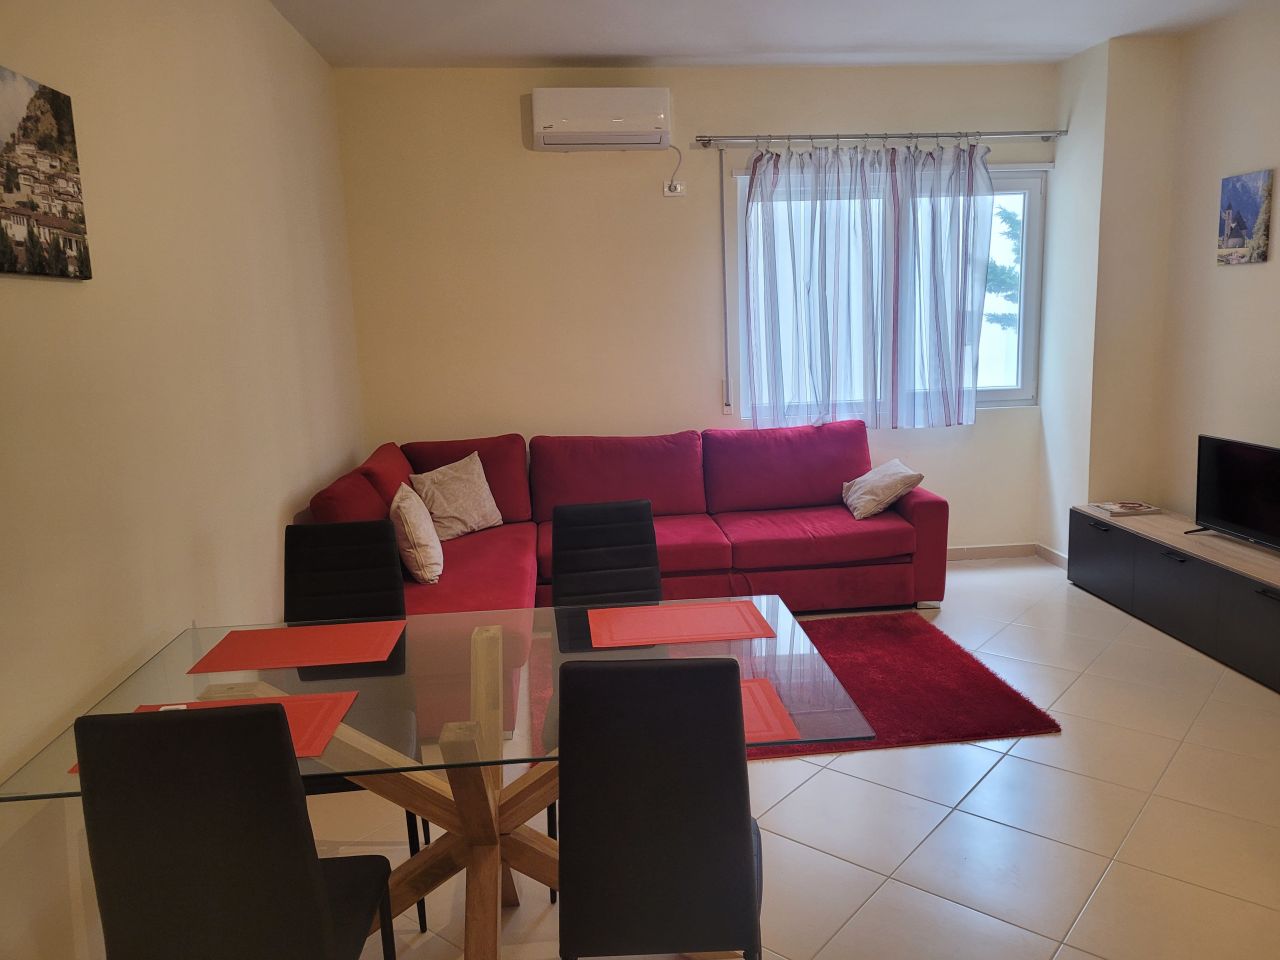 One Bedroom Apartment For Sale In Durres Albania, Located In A Quiet Area, With A Great Sea View